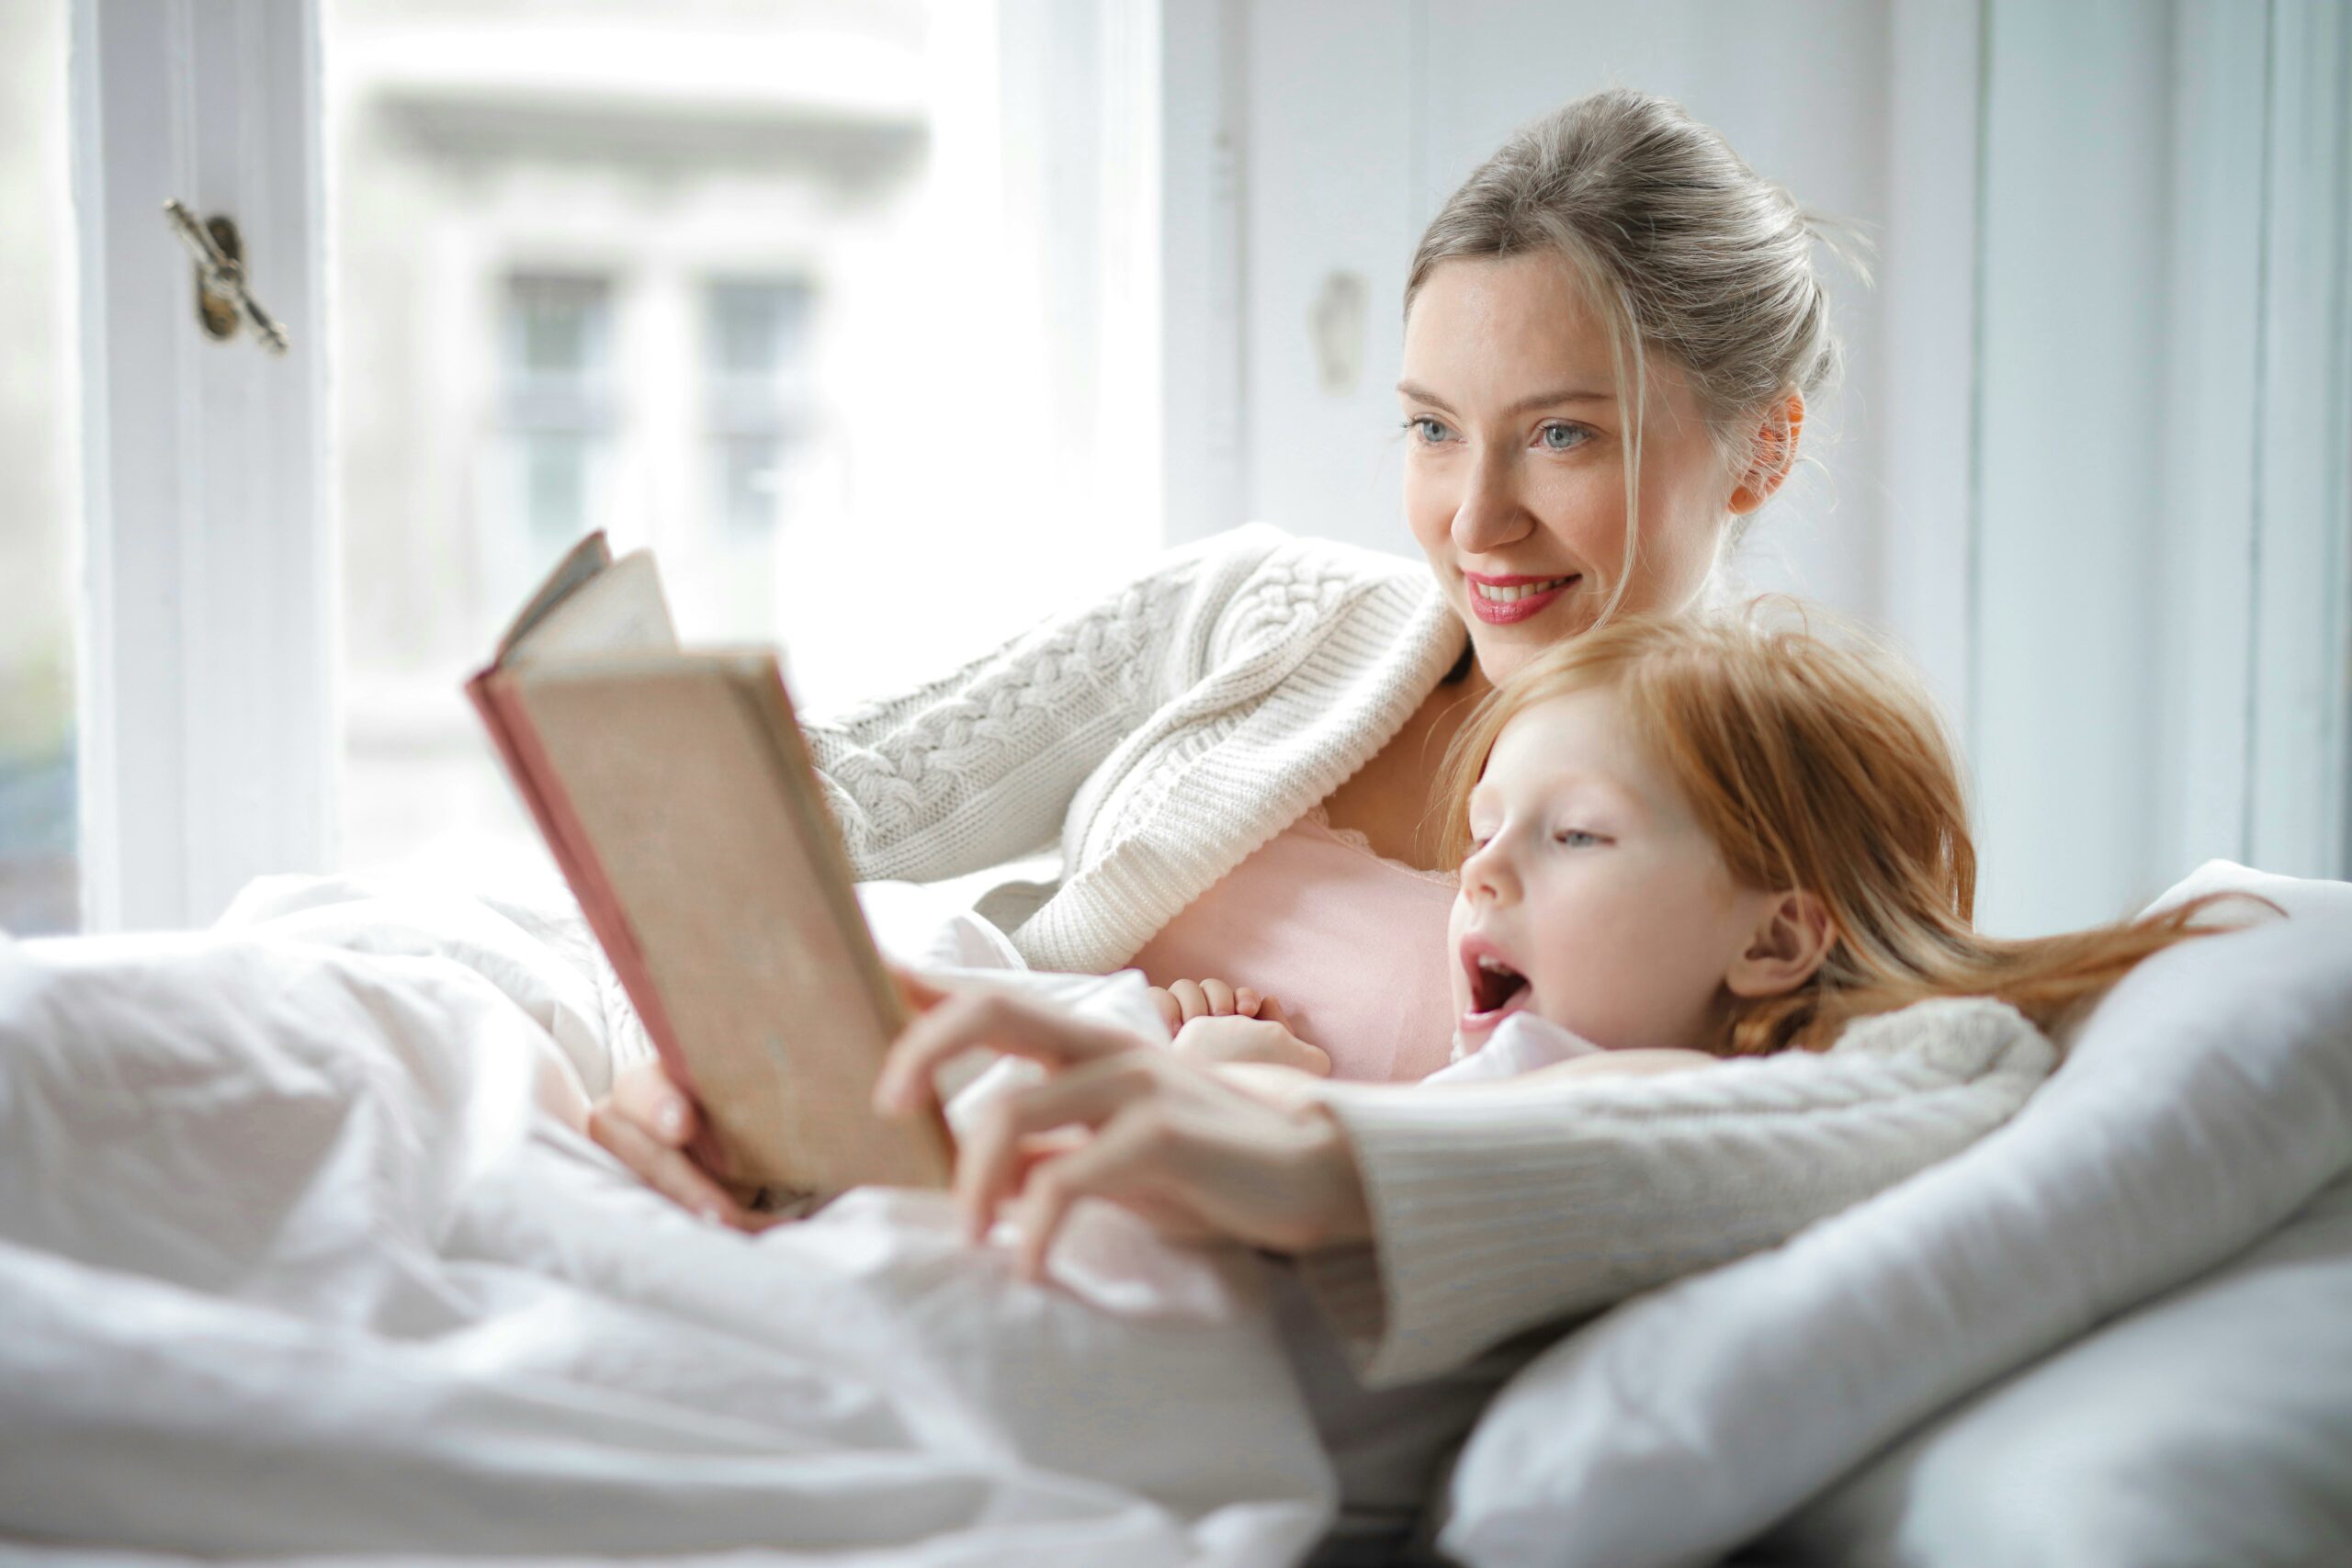 Attentive nanny and young girl enjoying a book together in bed, showcasing the experienced and reliable one off childcare services offered by Lifetime of Love Nannies